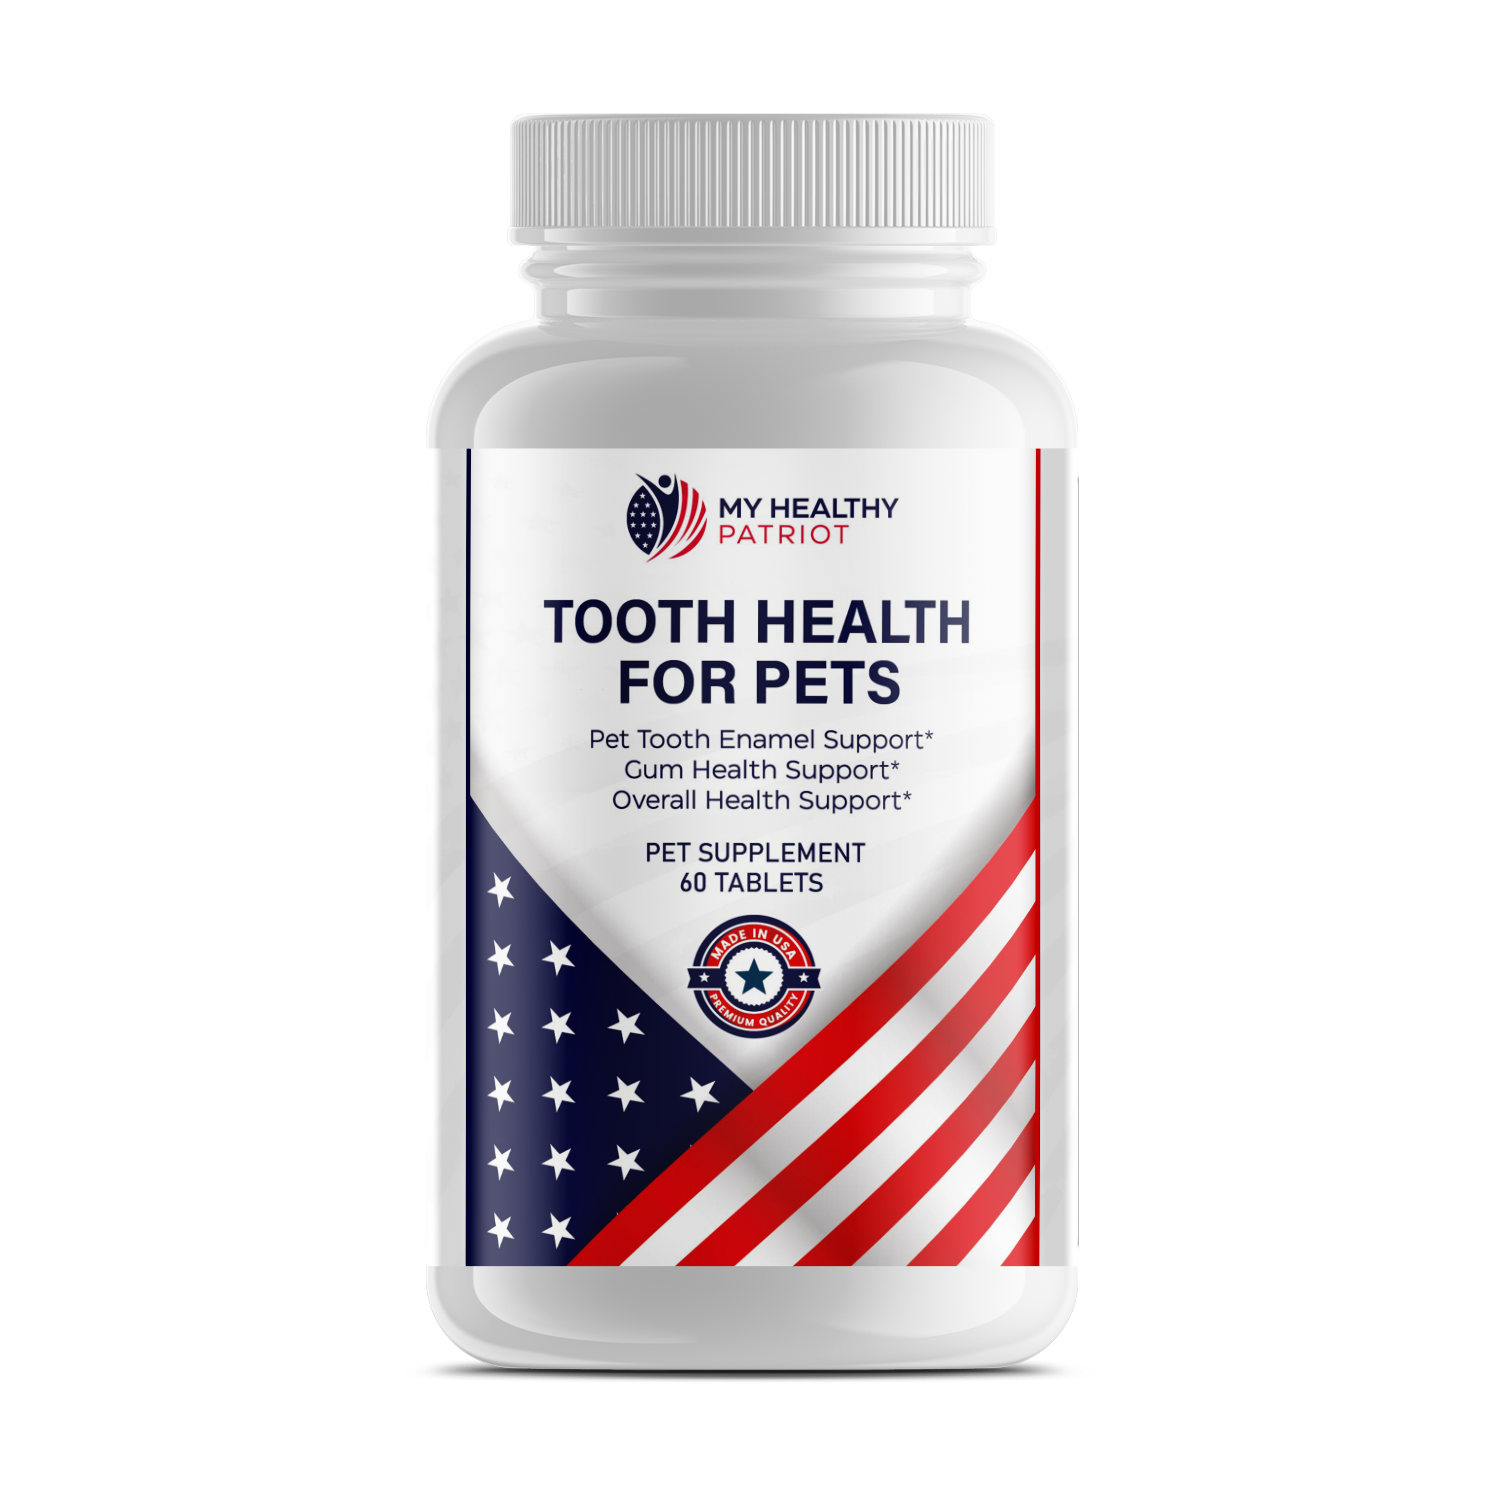 Tooth Health for Pets